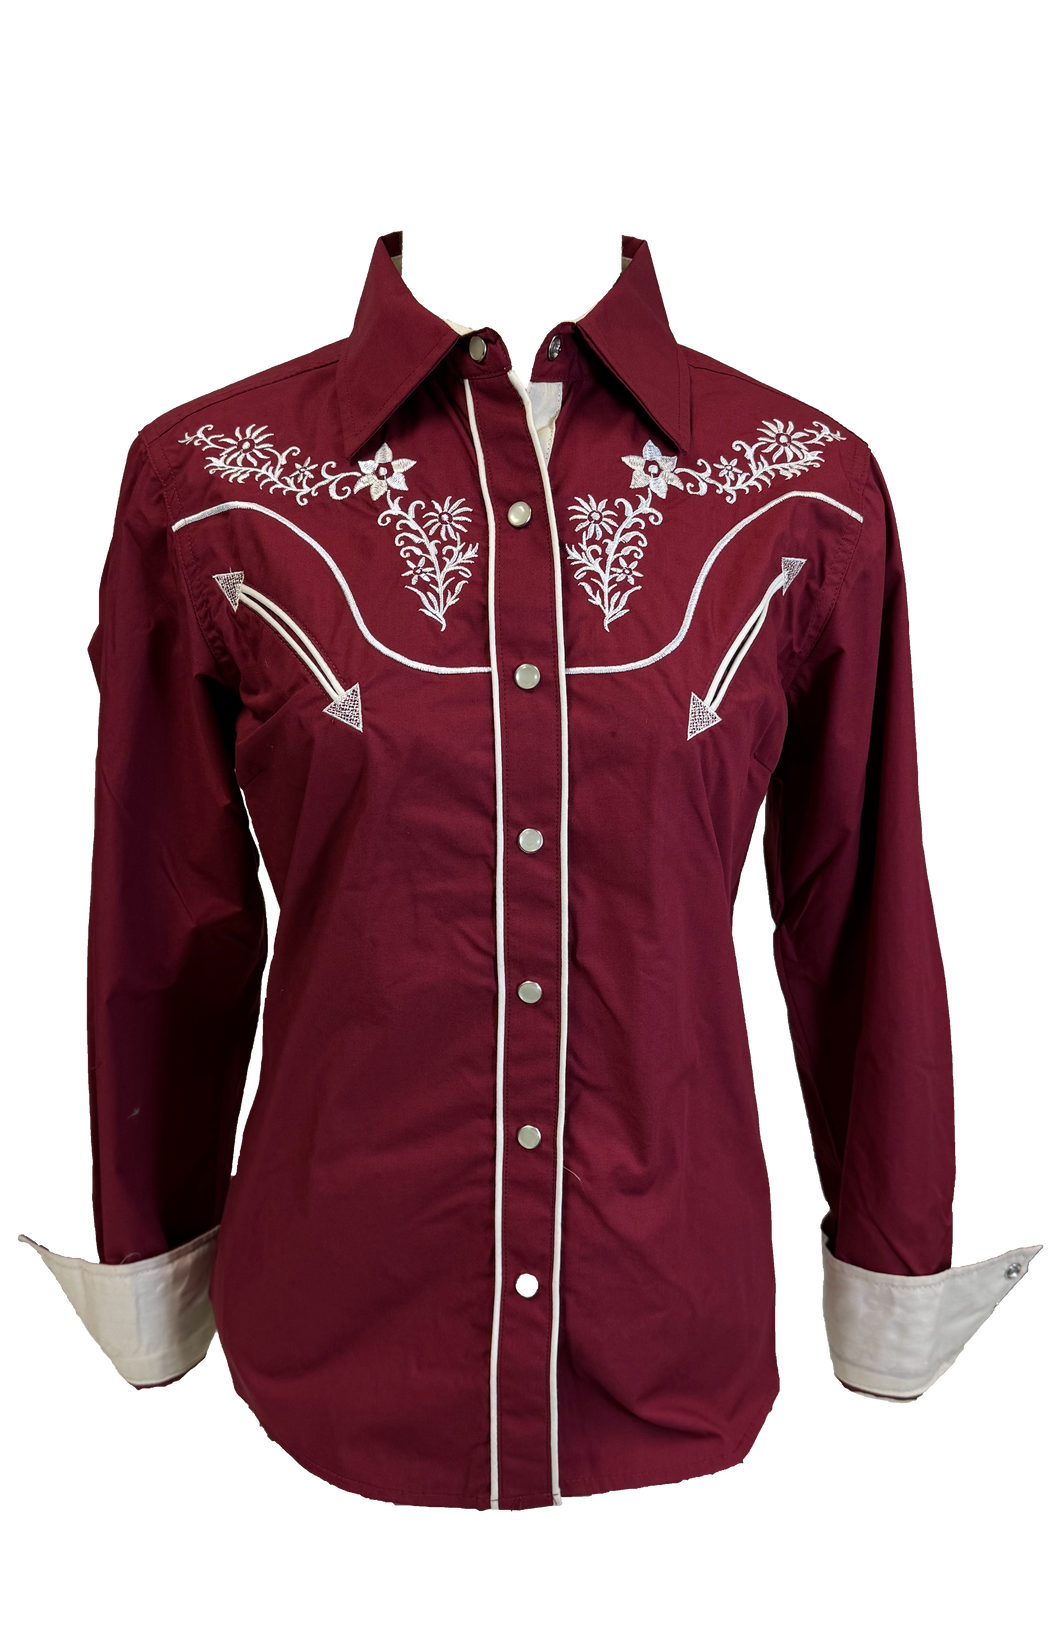 LADIES BUCKEROO SHIRTS: BURGUNDY RED FLORAL STITCH PEARL SNAP